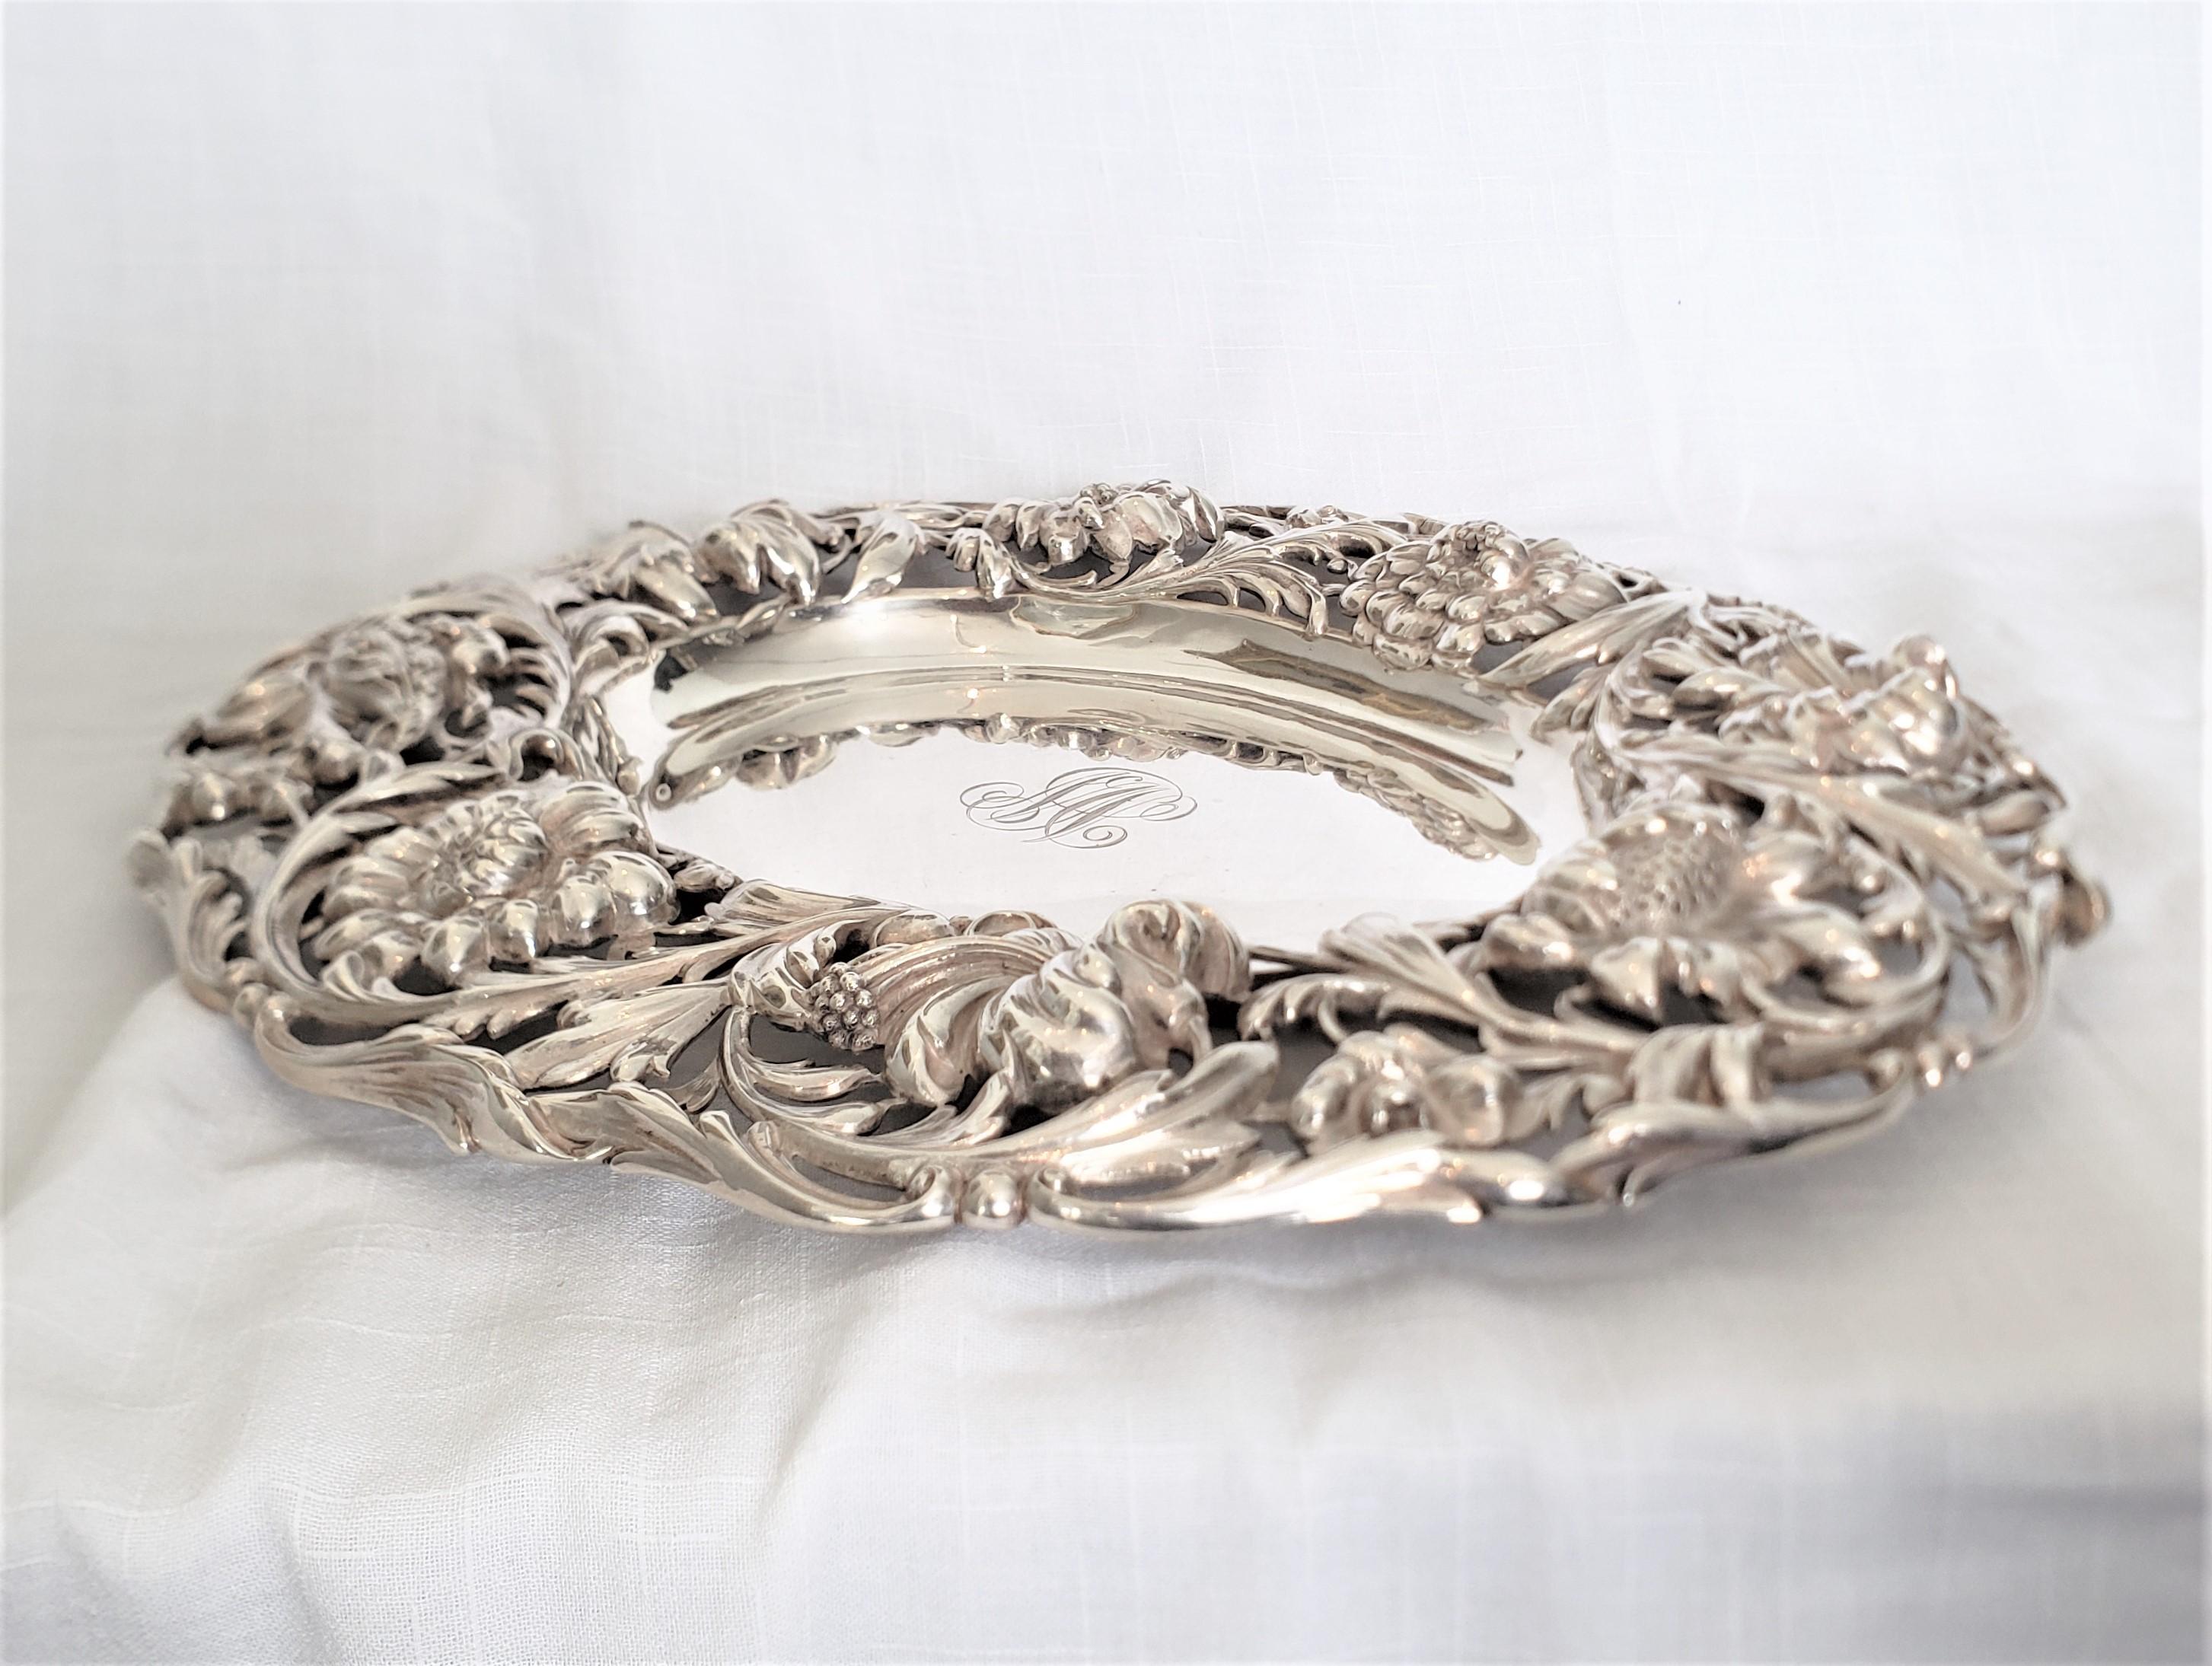 Antique Signed Tiffany & Co. Sterling Silver Serving Dish with Floral Decoration For Sale 3